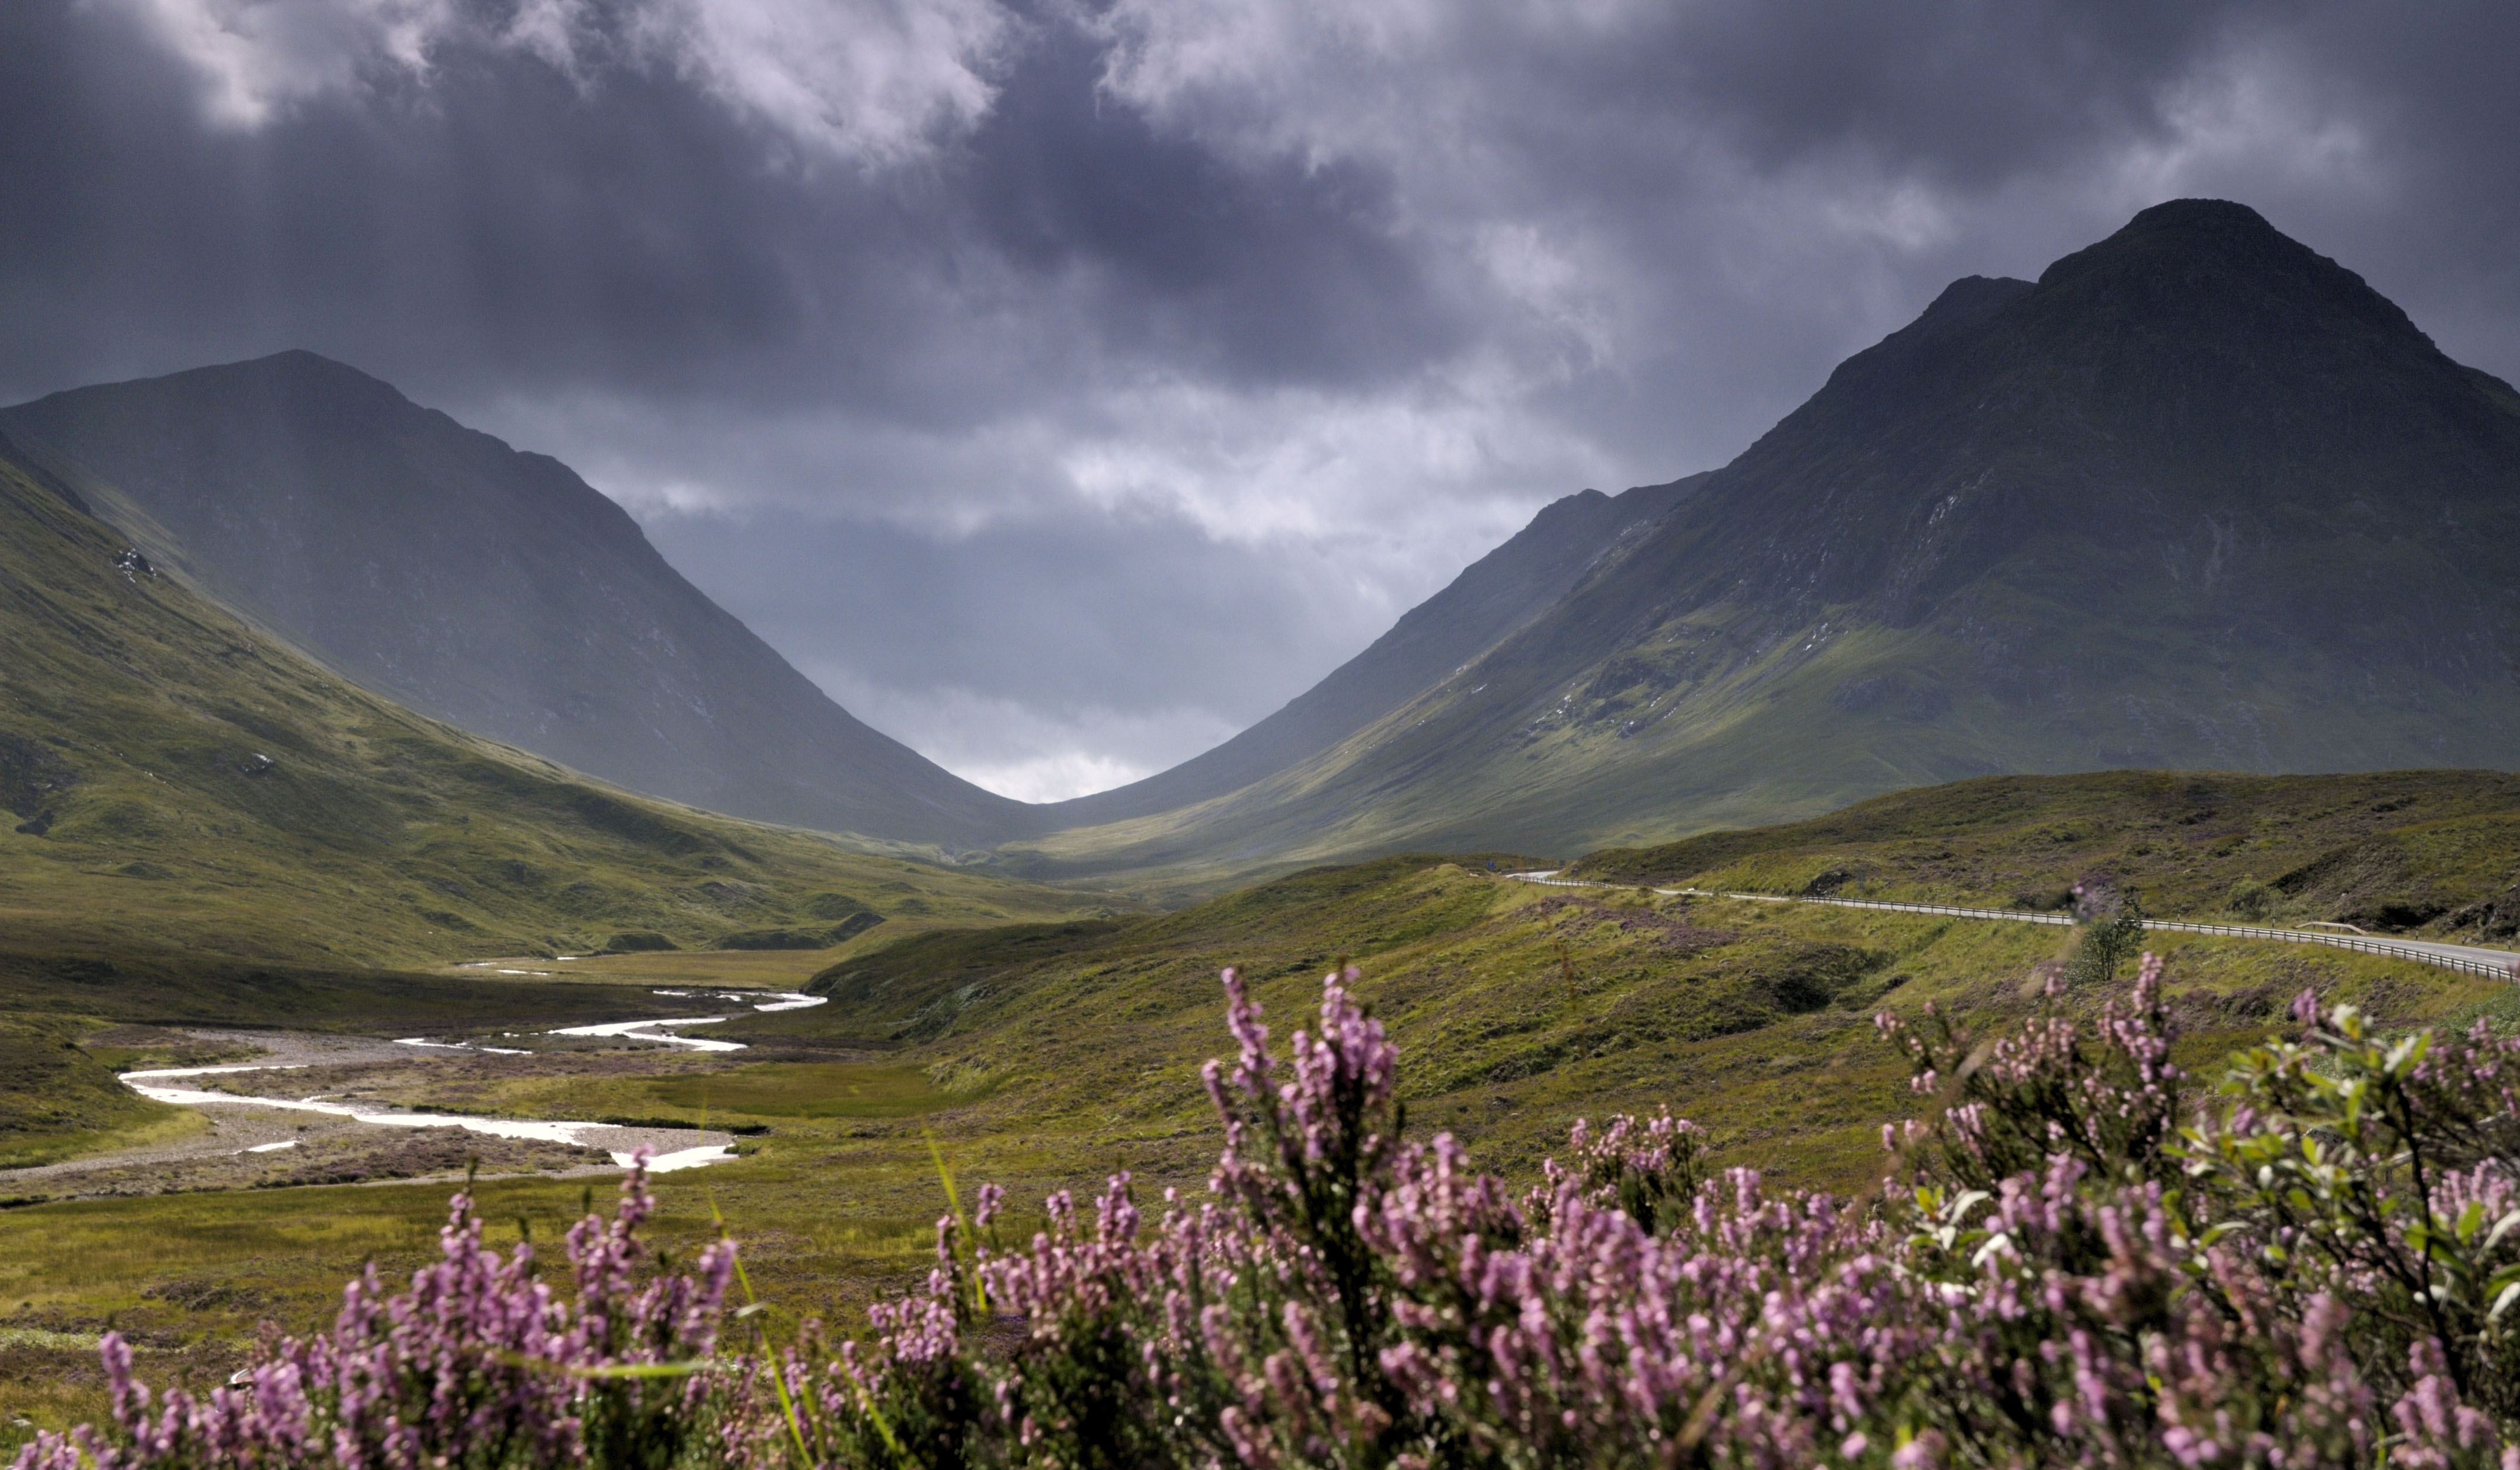 The legendary Glencoe will be one of the areas protected by the new alliance.